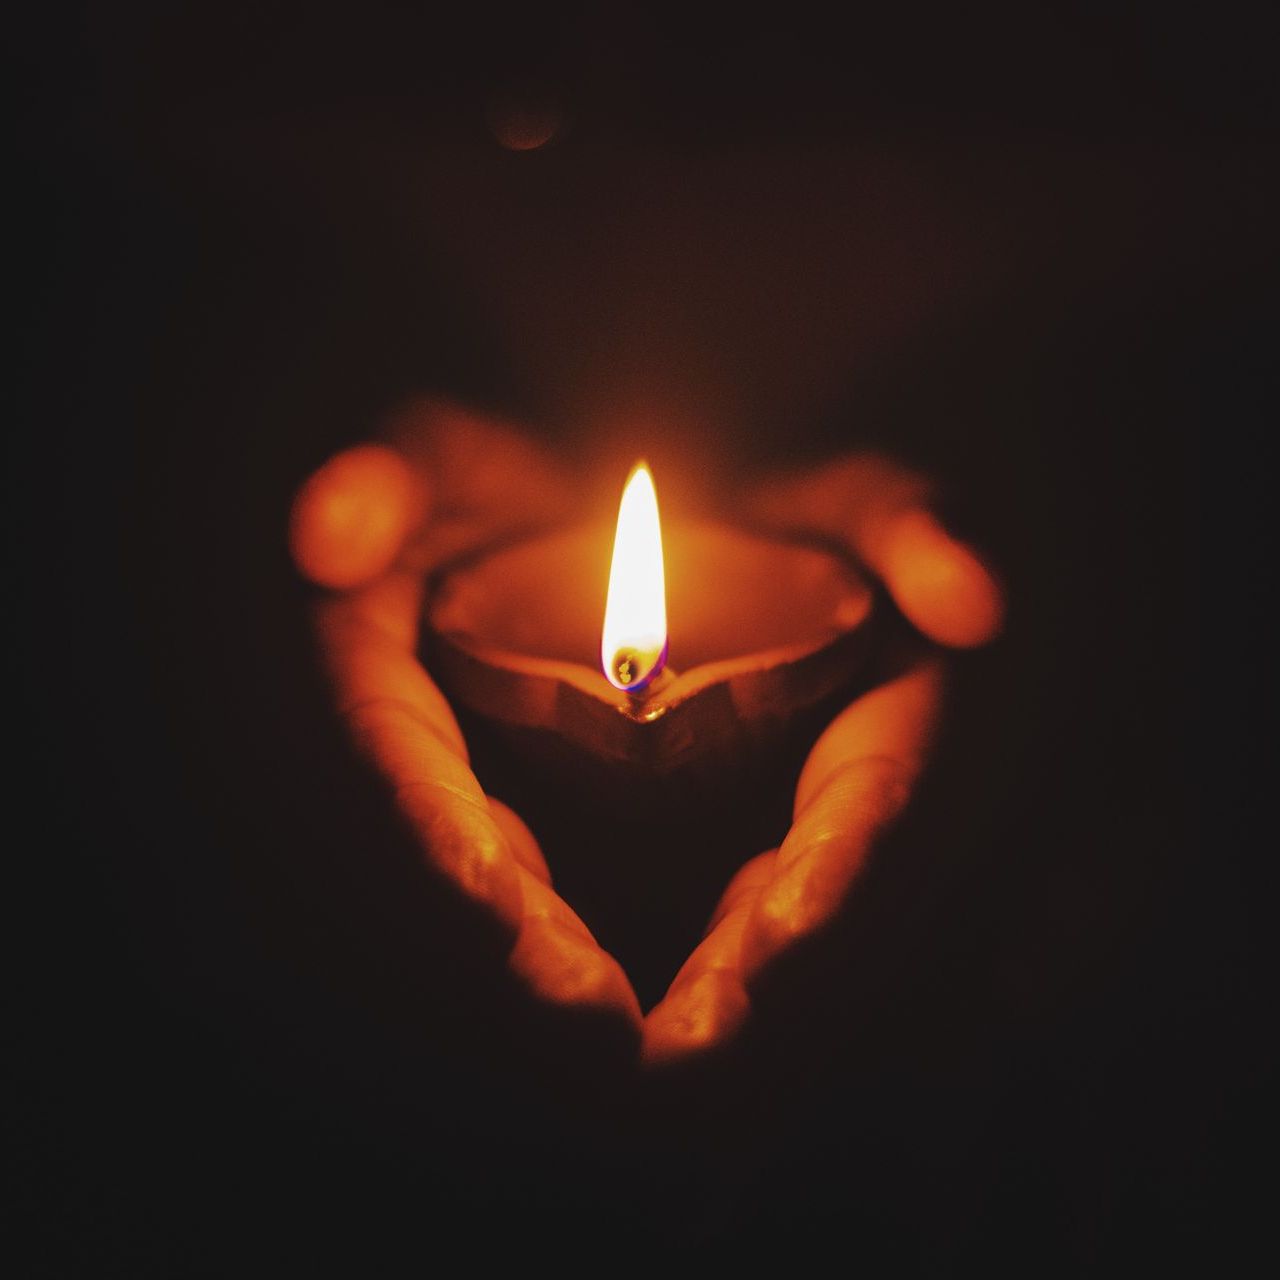 a person is holding a lit candle in their hands